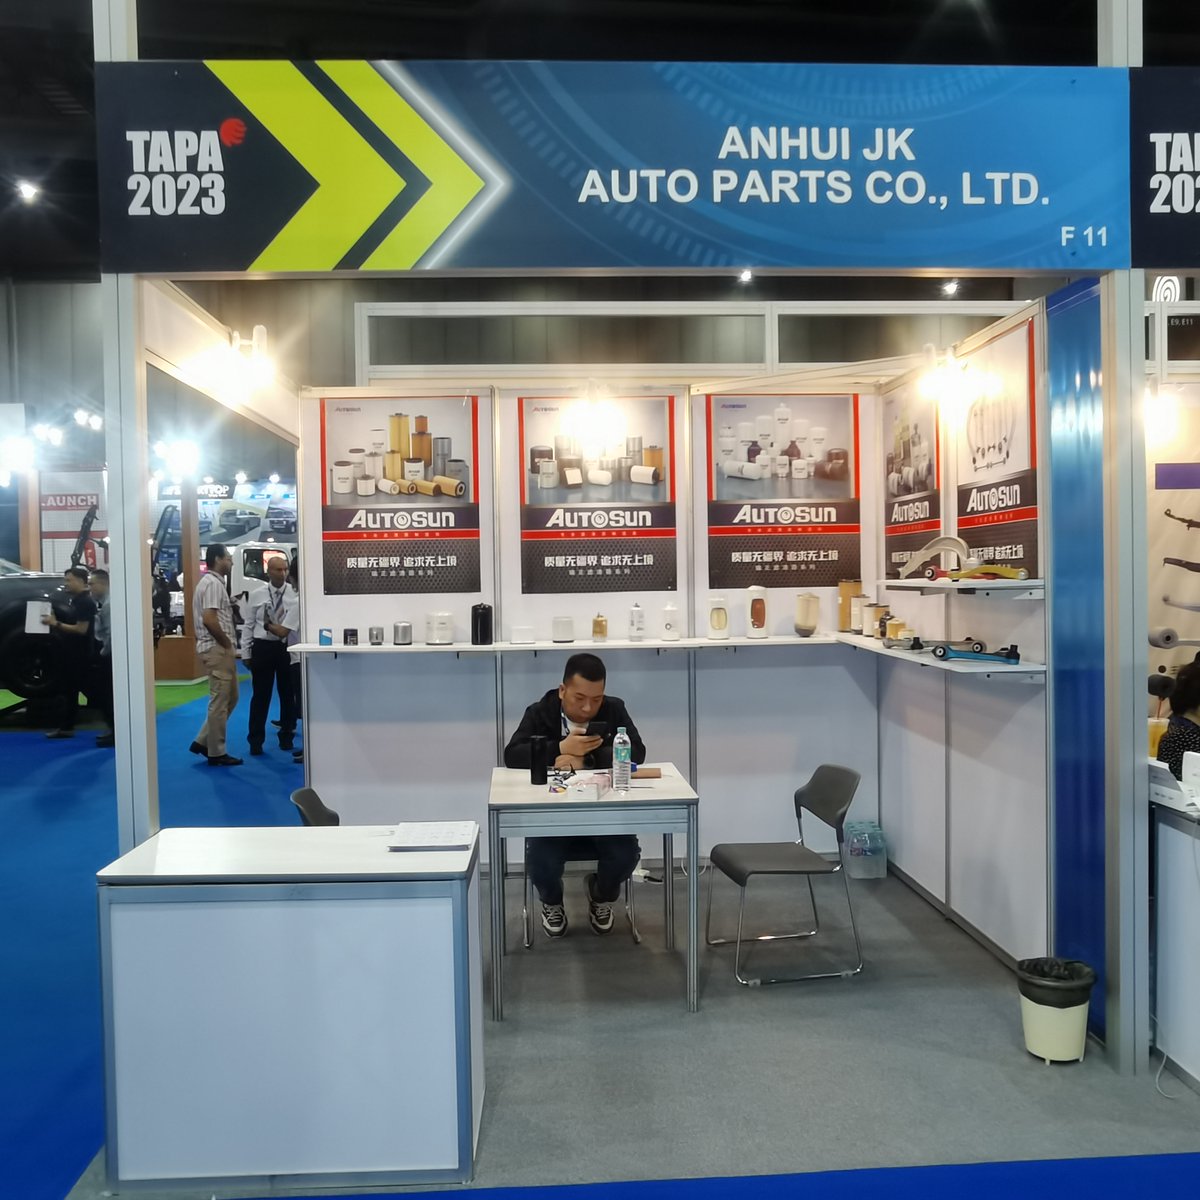 Welcome to our booth at Thailand Auto Parts & Accessories Fair.
#Tapa2023 #autoparts #filters #oilfilters #fuelfilters #controlarm #carparts #truckparts